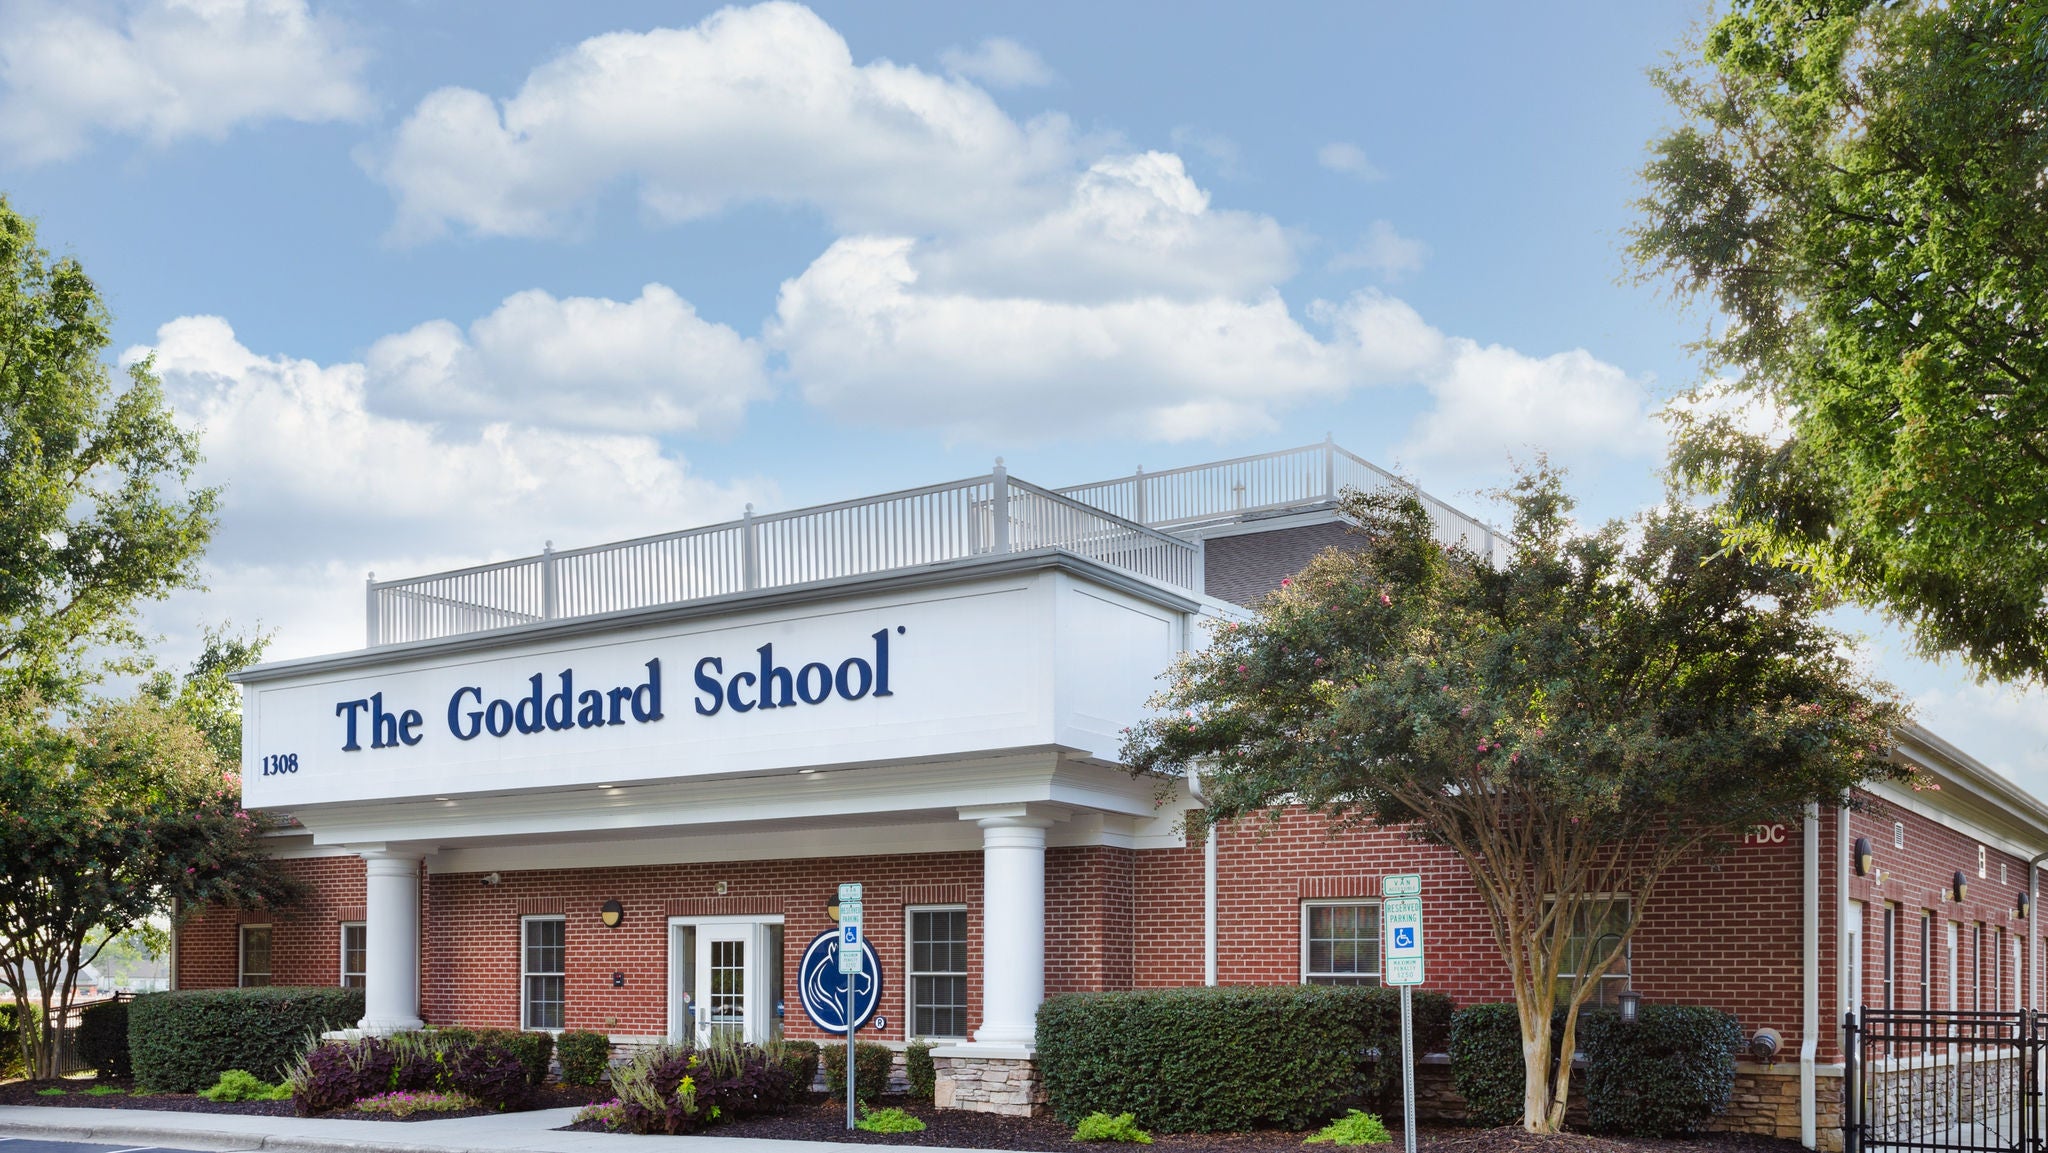 Exterior of the Goddard School in Wake Forest North Carolina